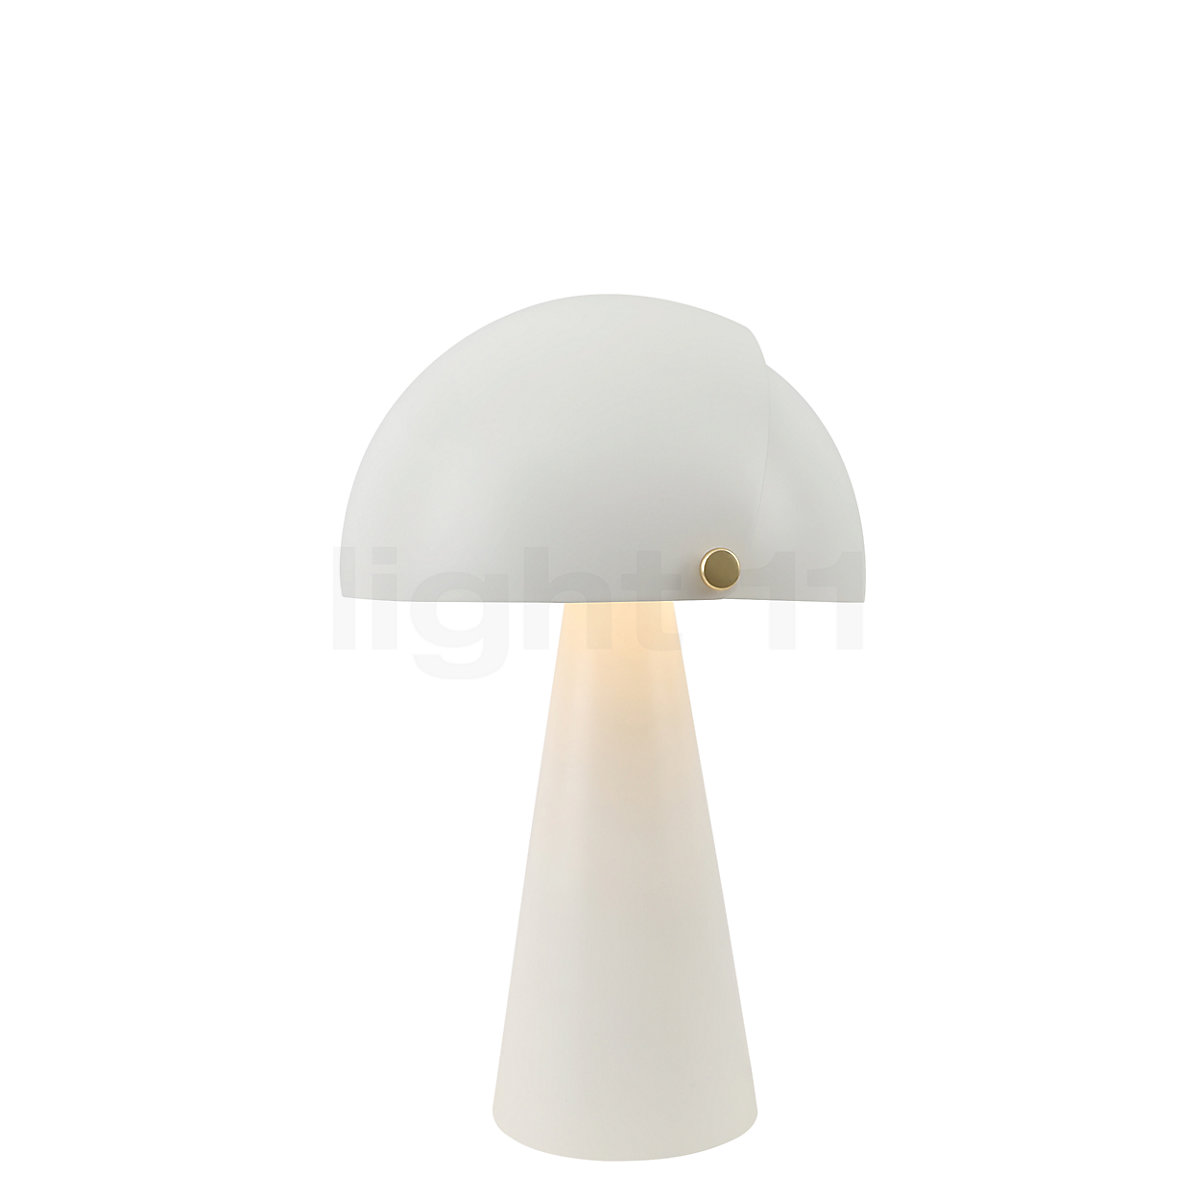 Buy Design for the People Lamp at Table Align